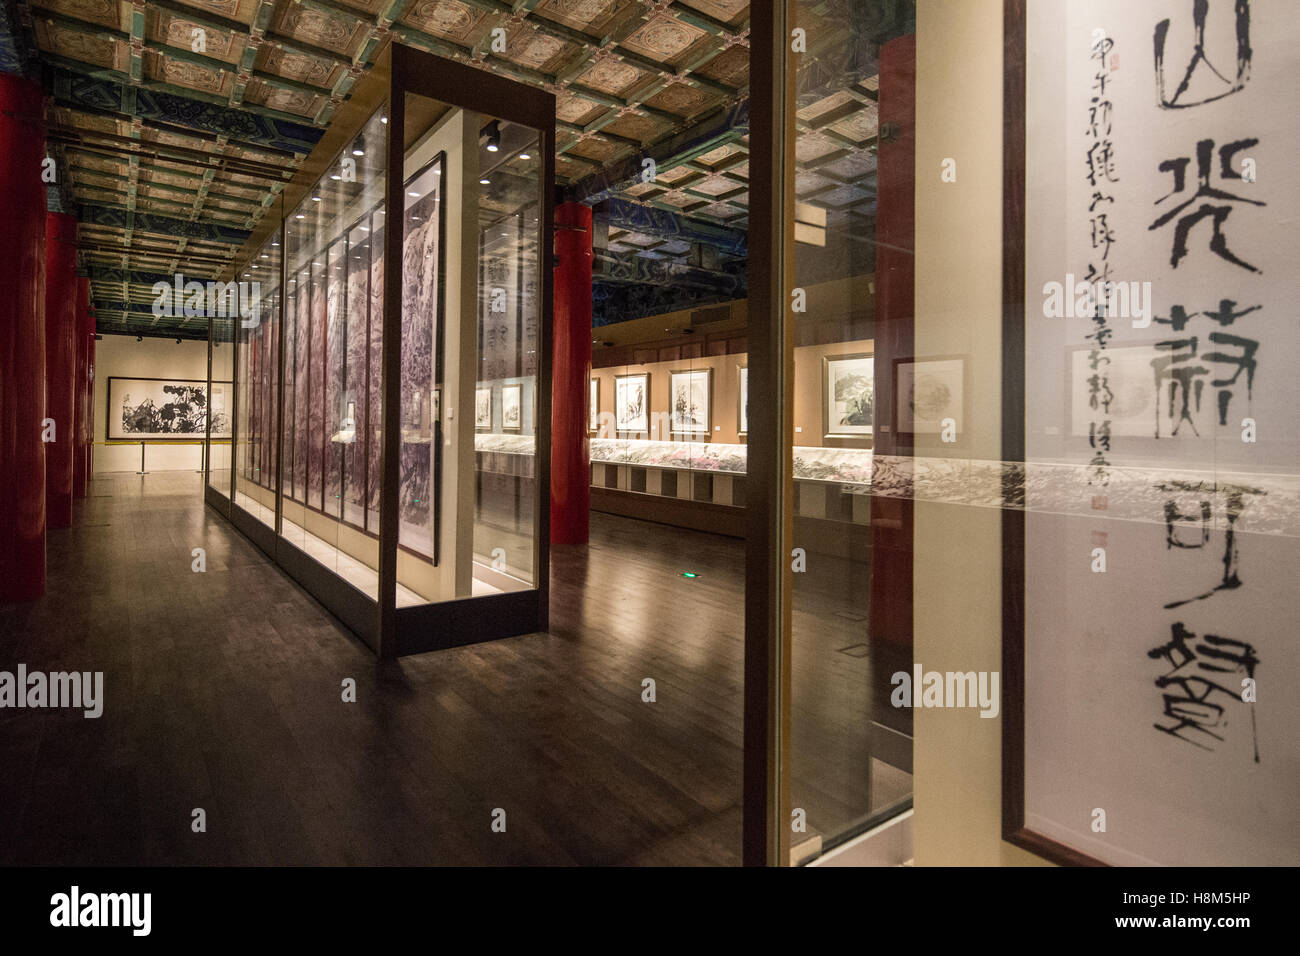 Beijing China - Ancient paintings and artifacts inside the Palace Museum located in the Forbidden City. Stock Photo